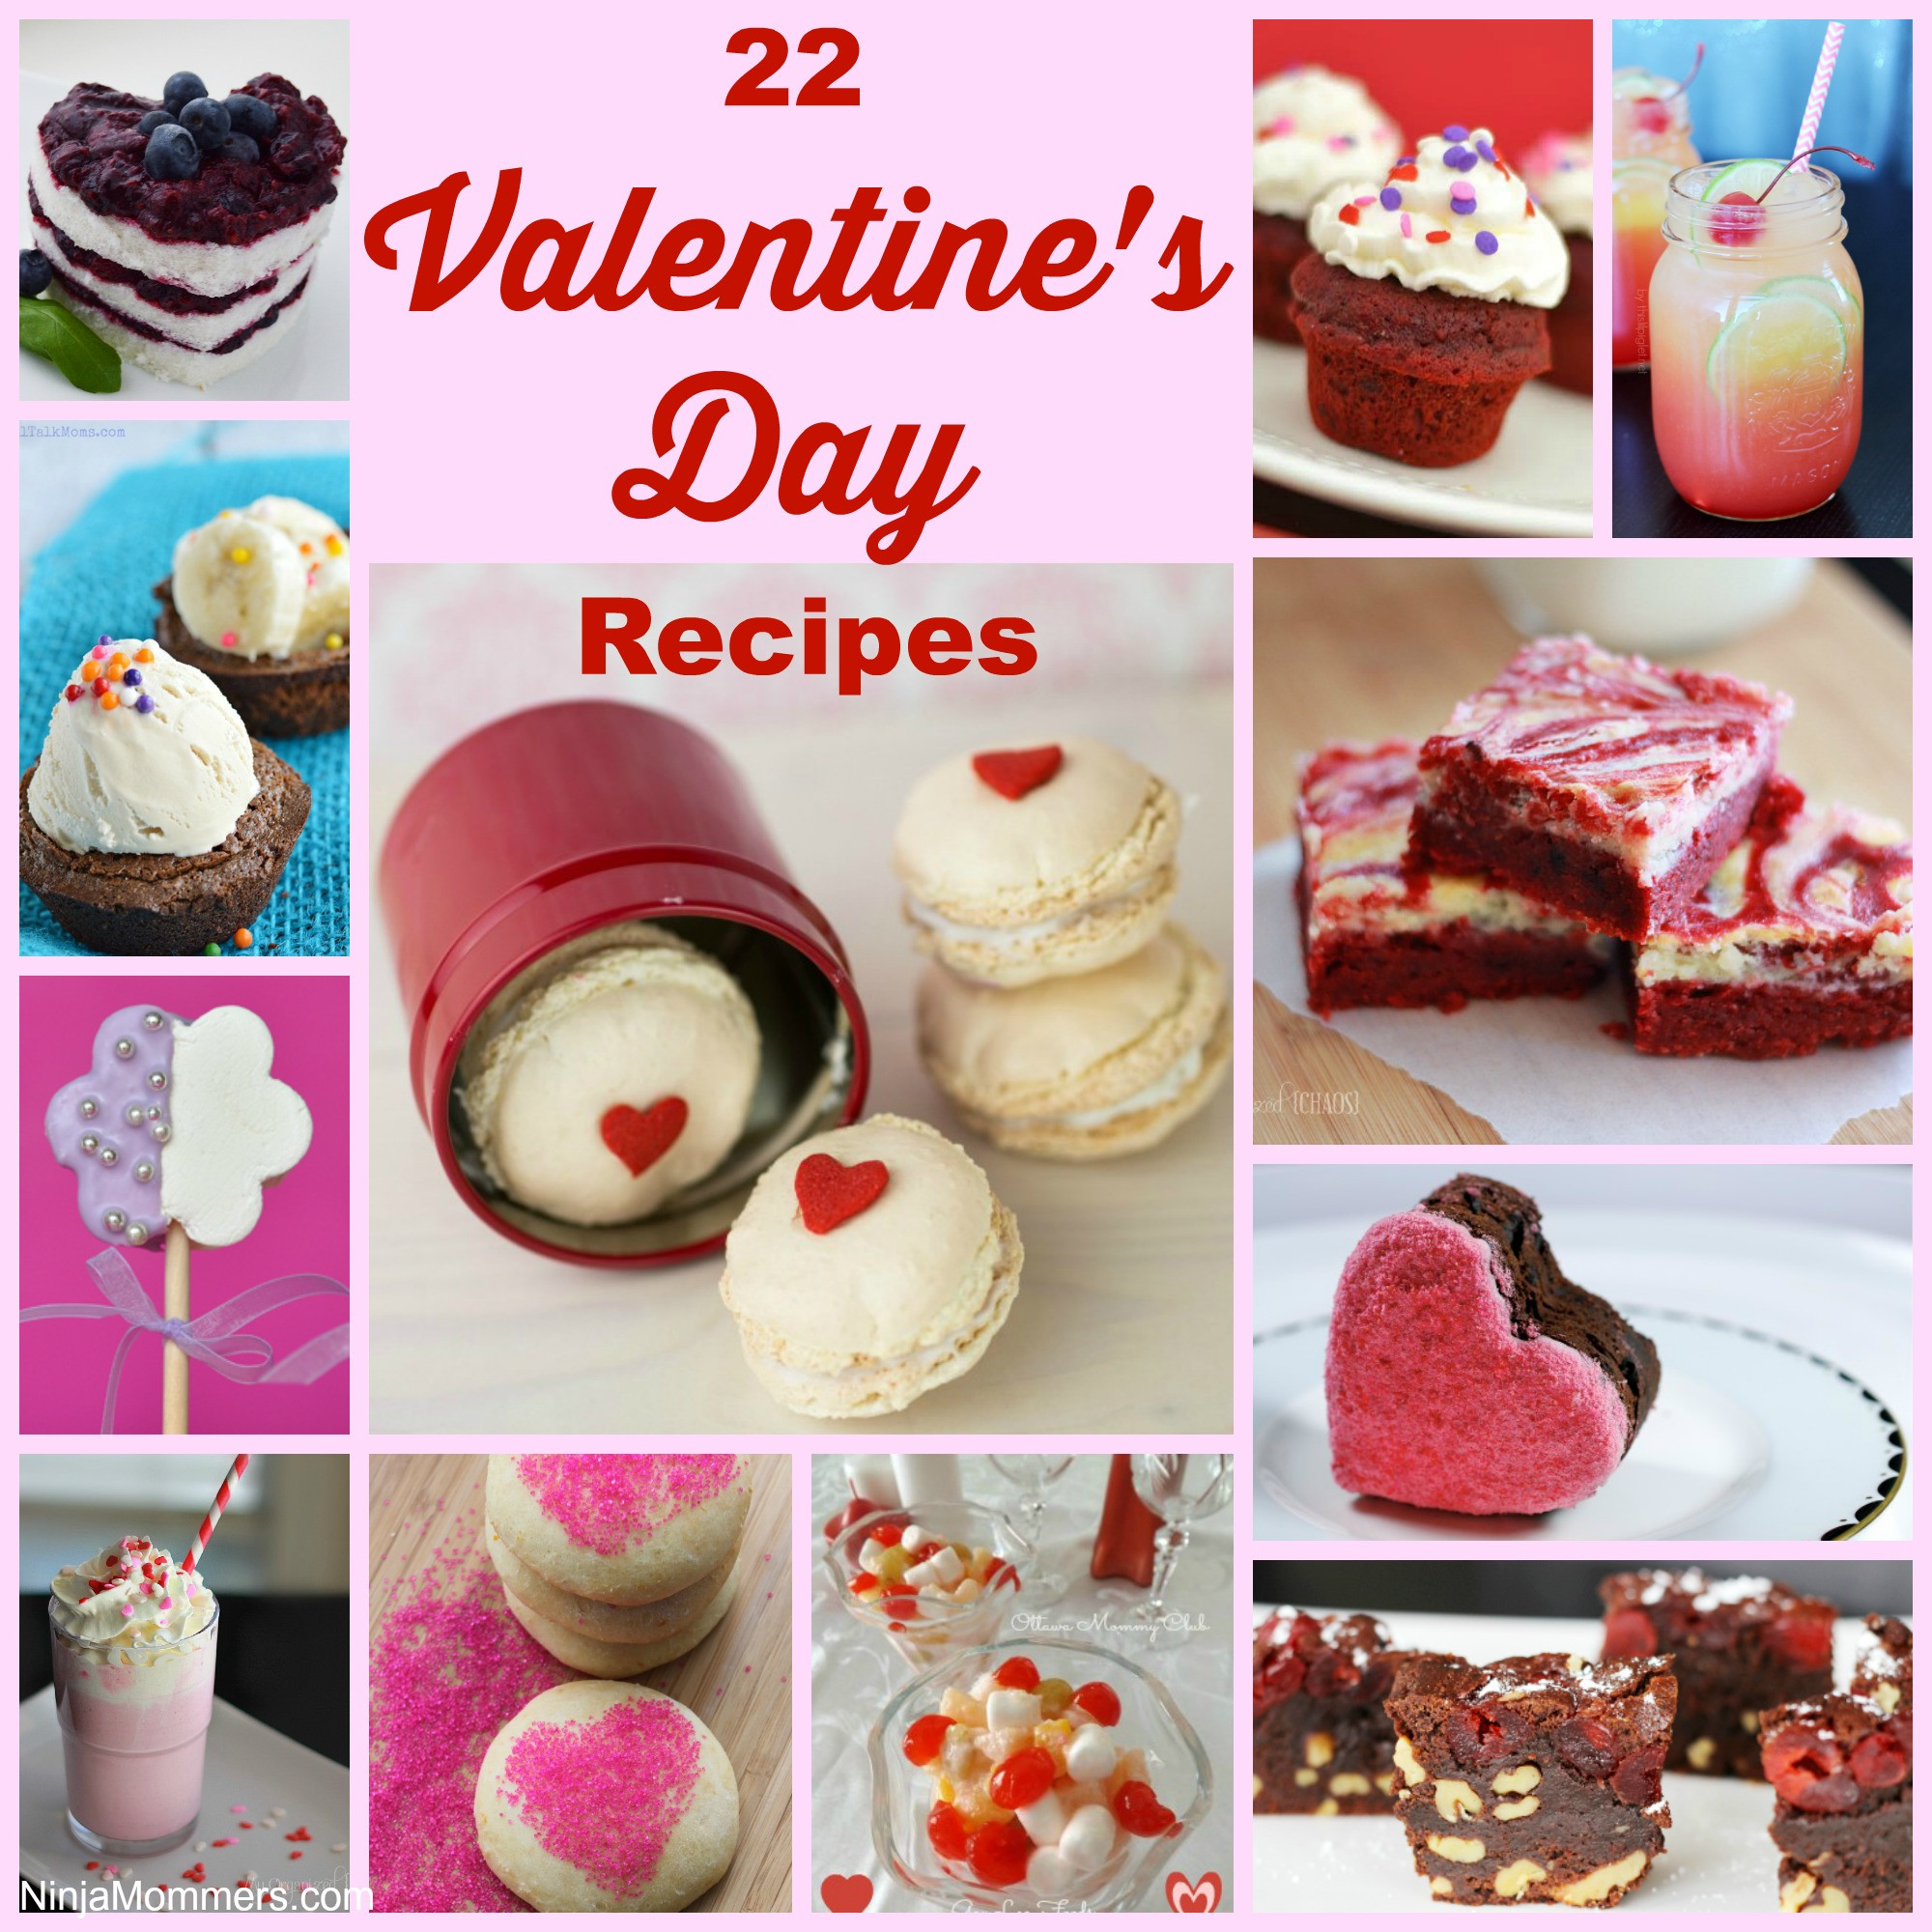 Valentines Day Recipe
 Valentine s Day Recipes 22 Awesome Recipes to Try